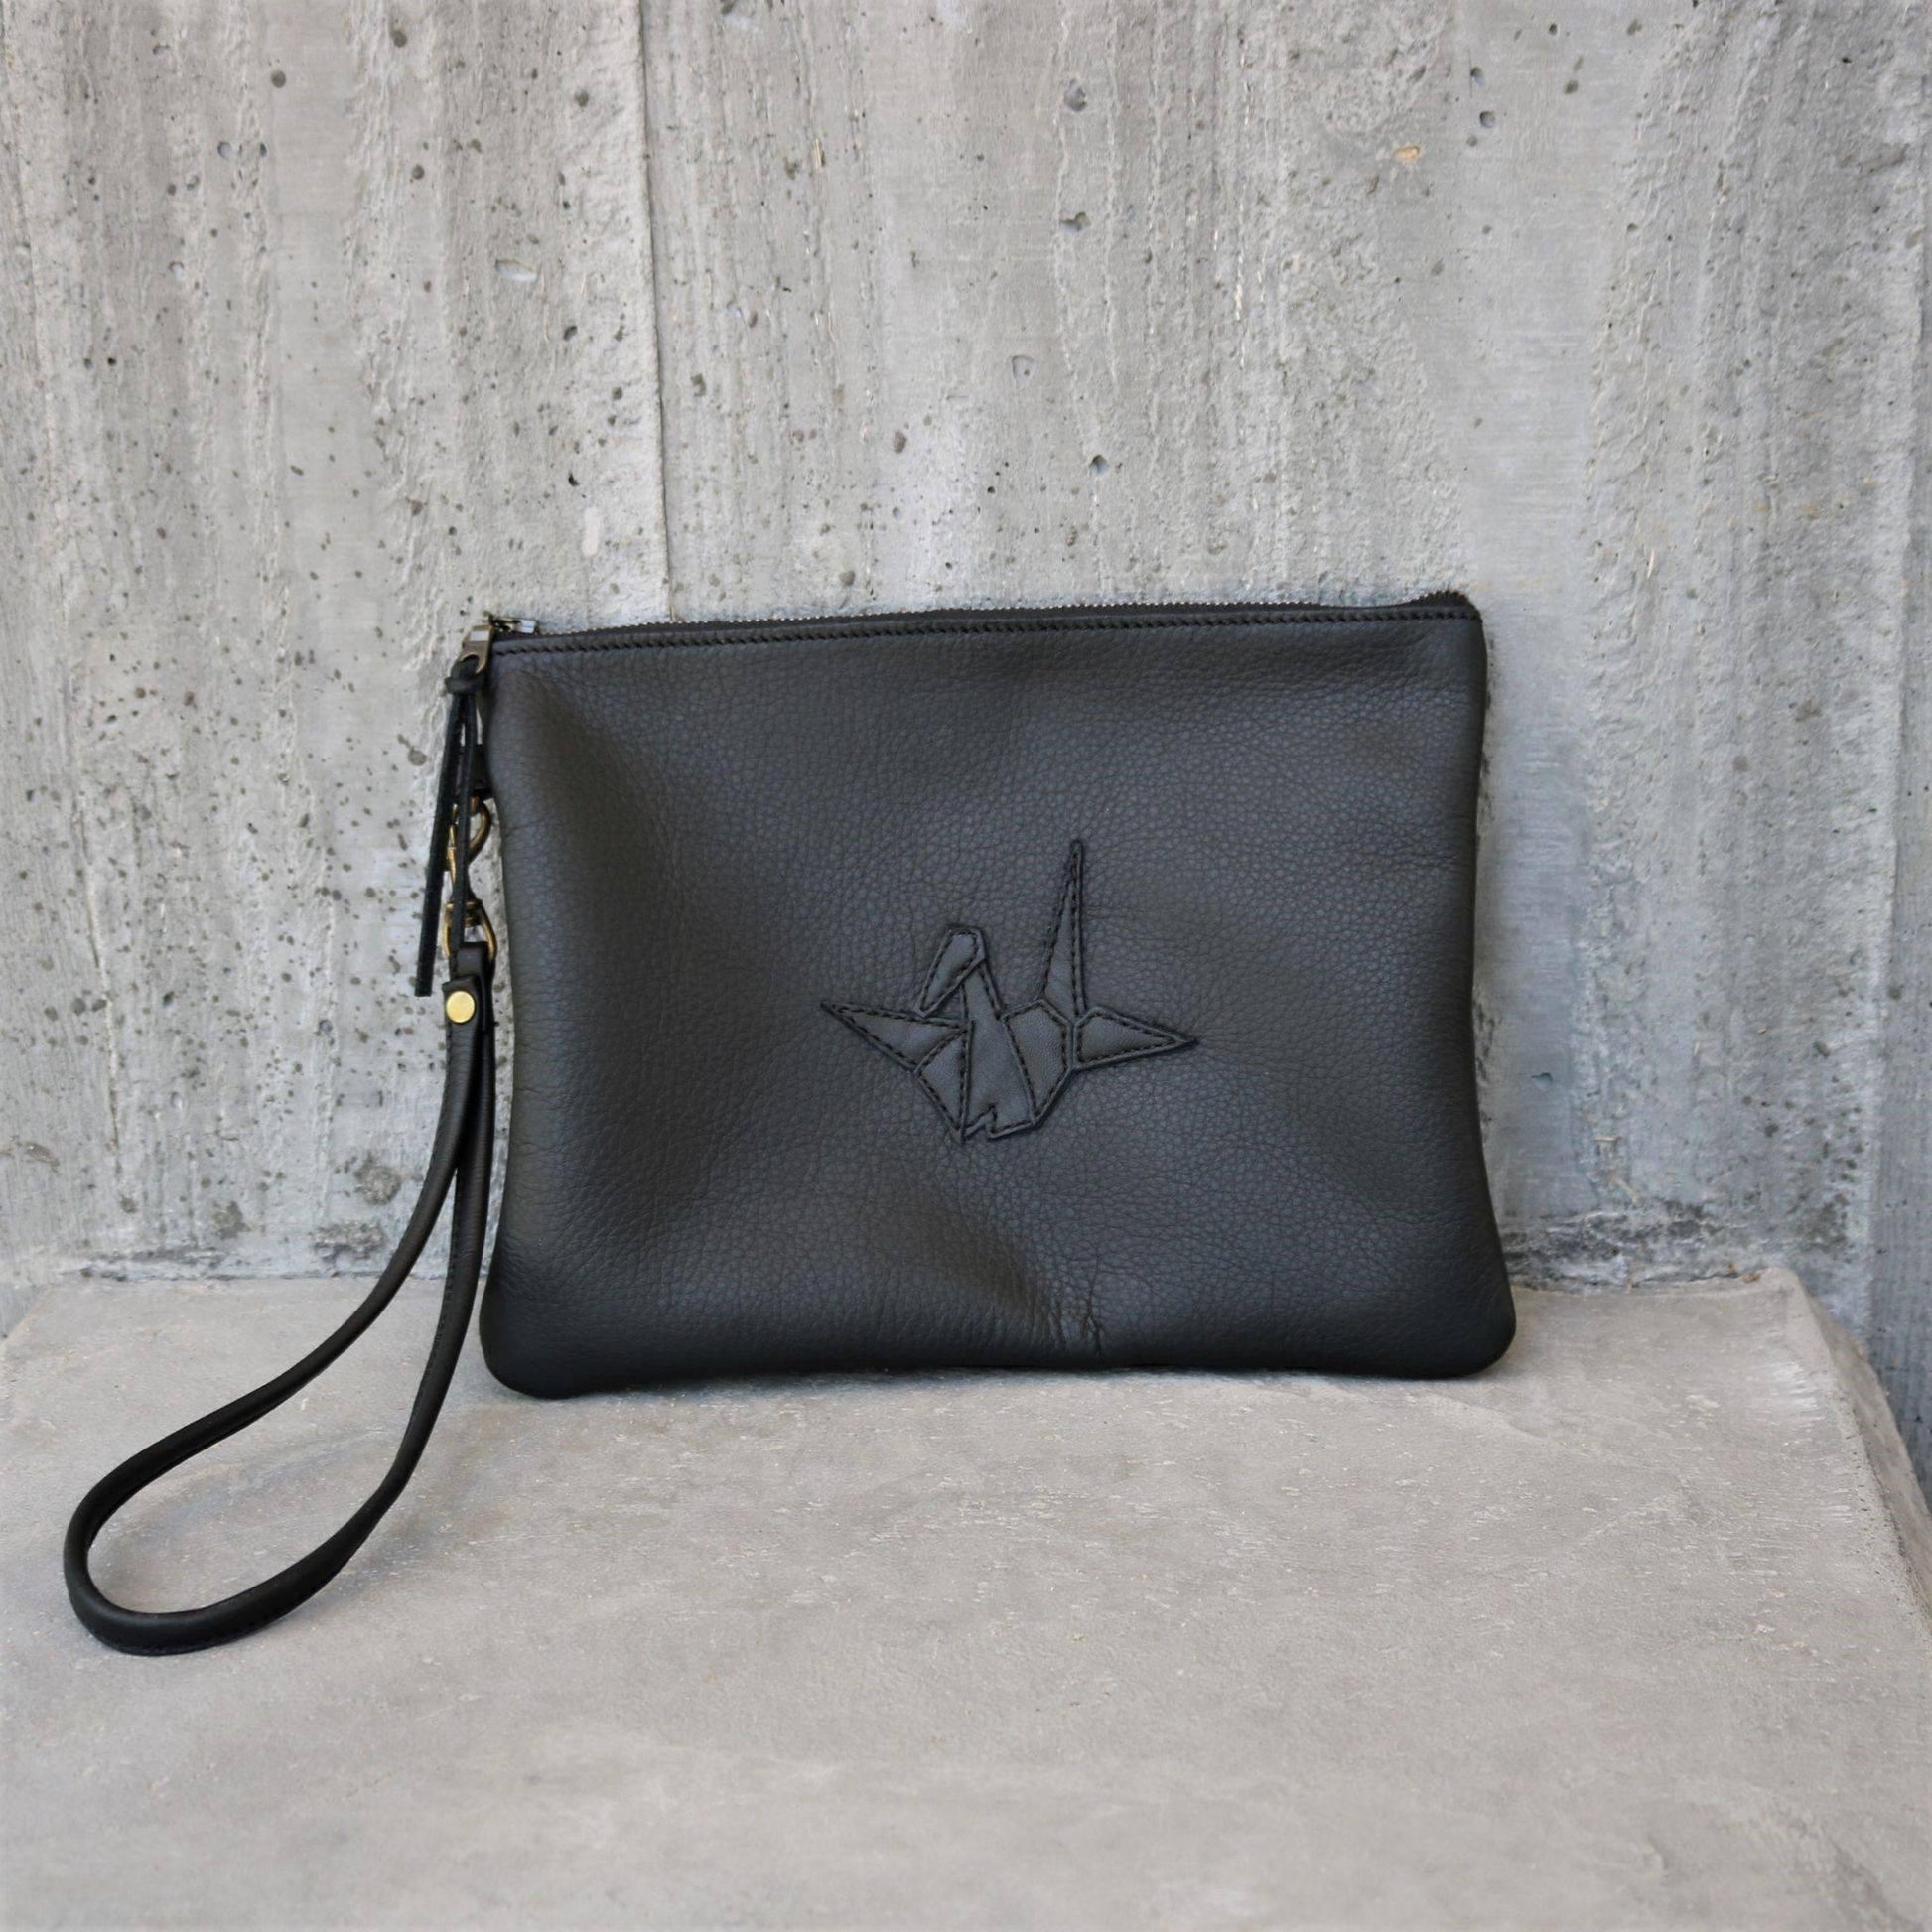 Crane Inspired Leather Pouch - Orienvintique 